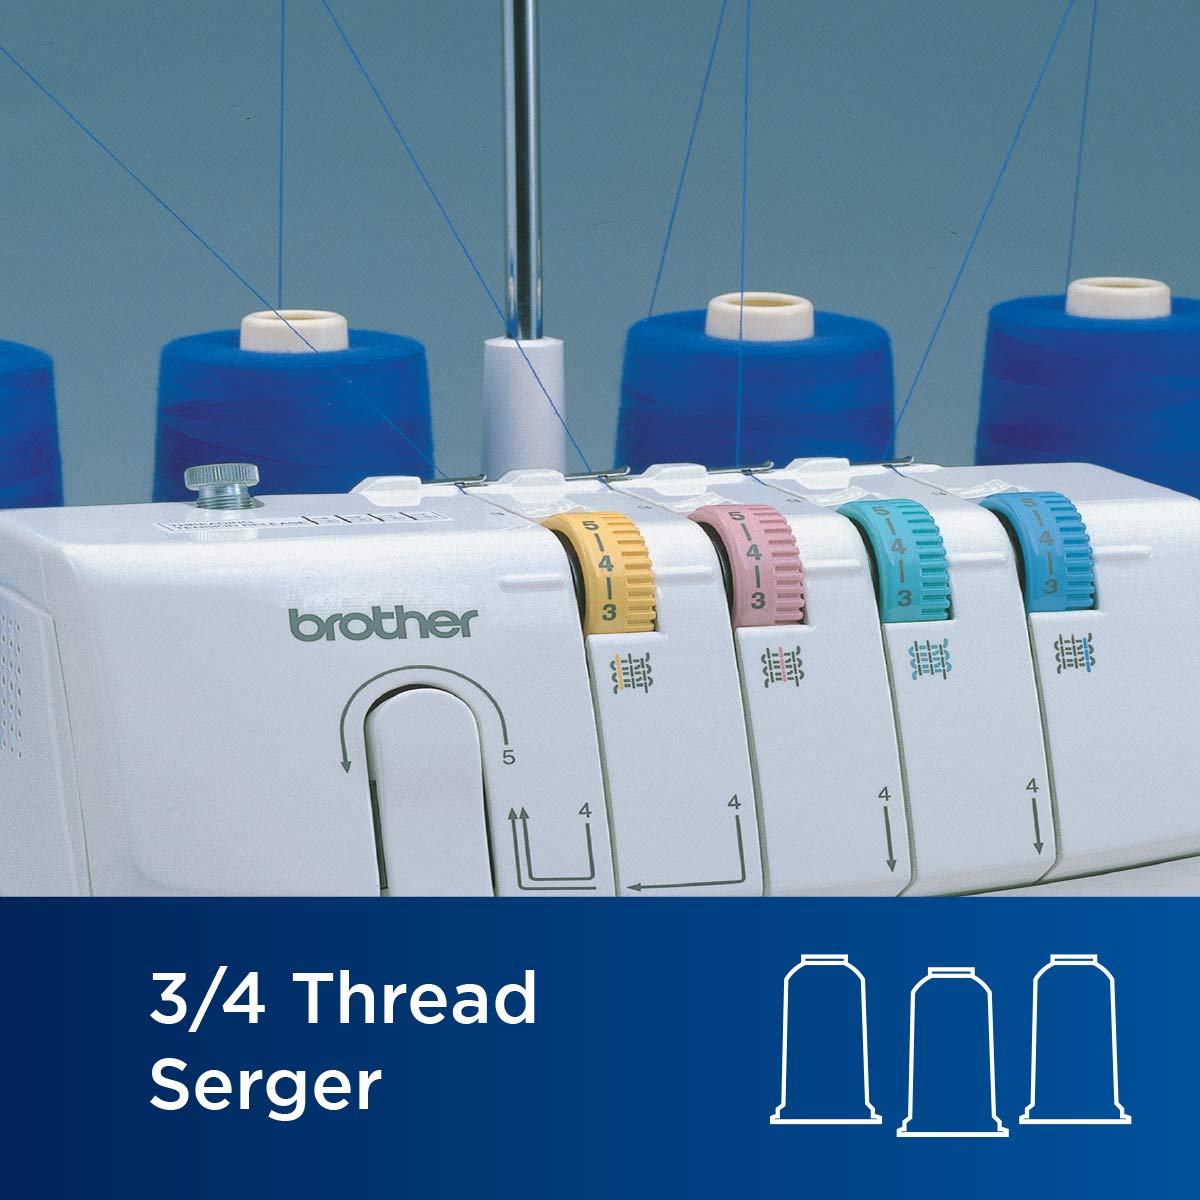 Brother Serger, 1034D, Heavy-Duty Metal Frame Overlock Machine, 1,300 Stitches Per Minute, Removeable Trim Trap, 3 Included Accessory Feet, White